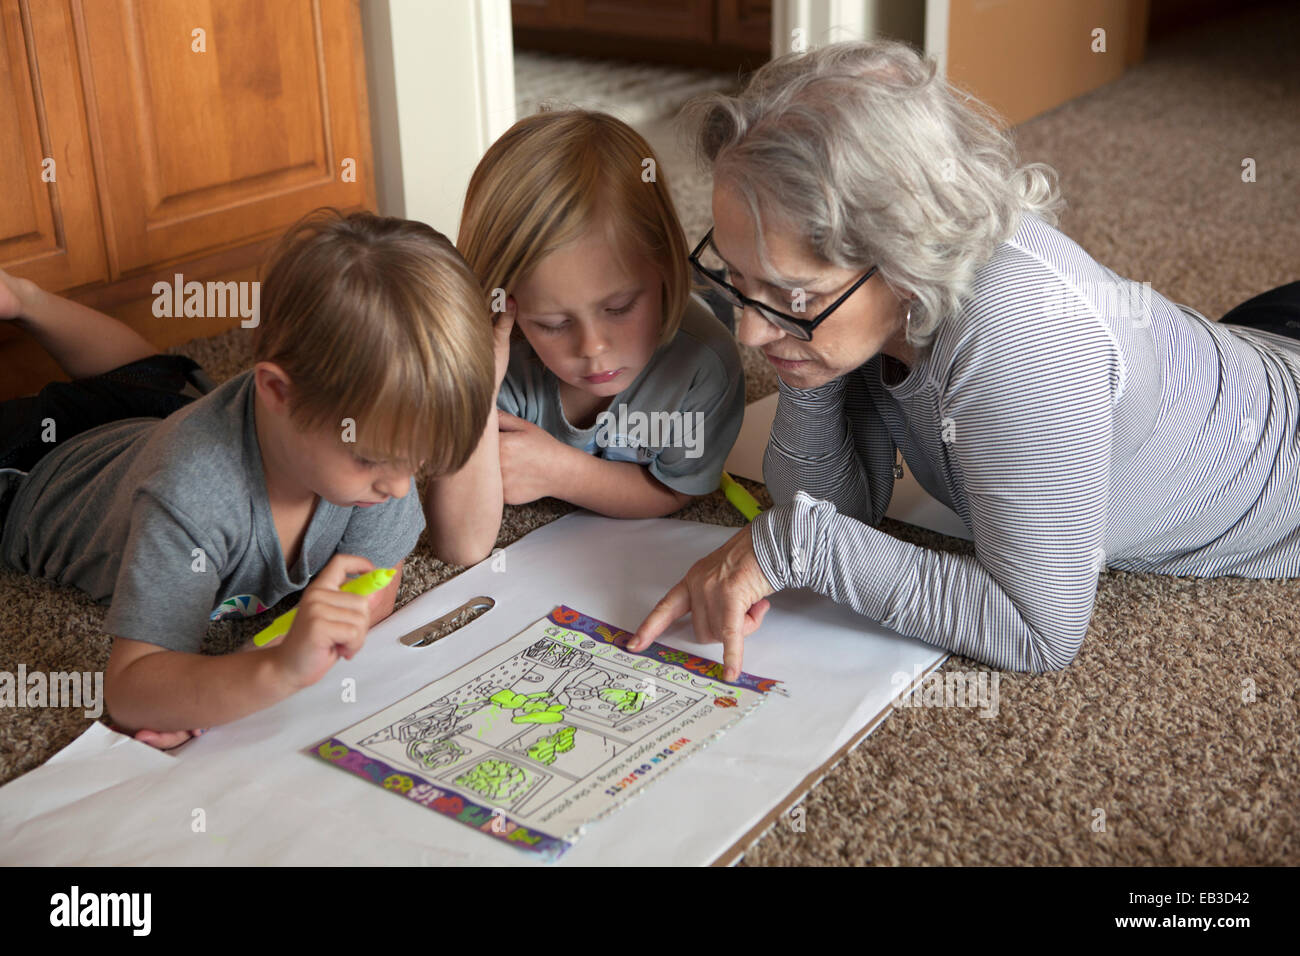 Caucasian grandmother and grandchildren coloring together on floor Stock Photo